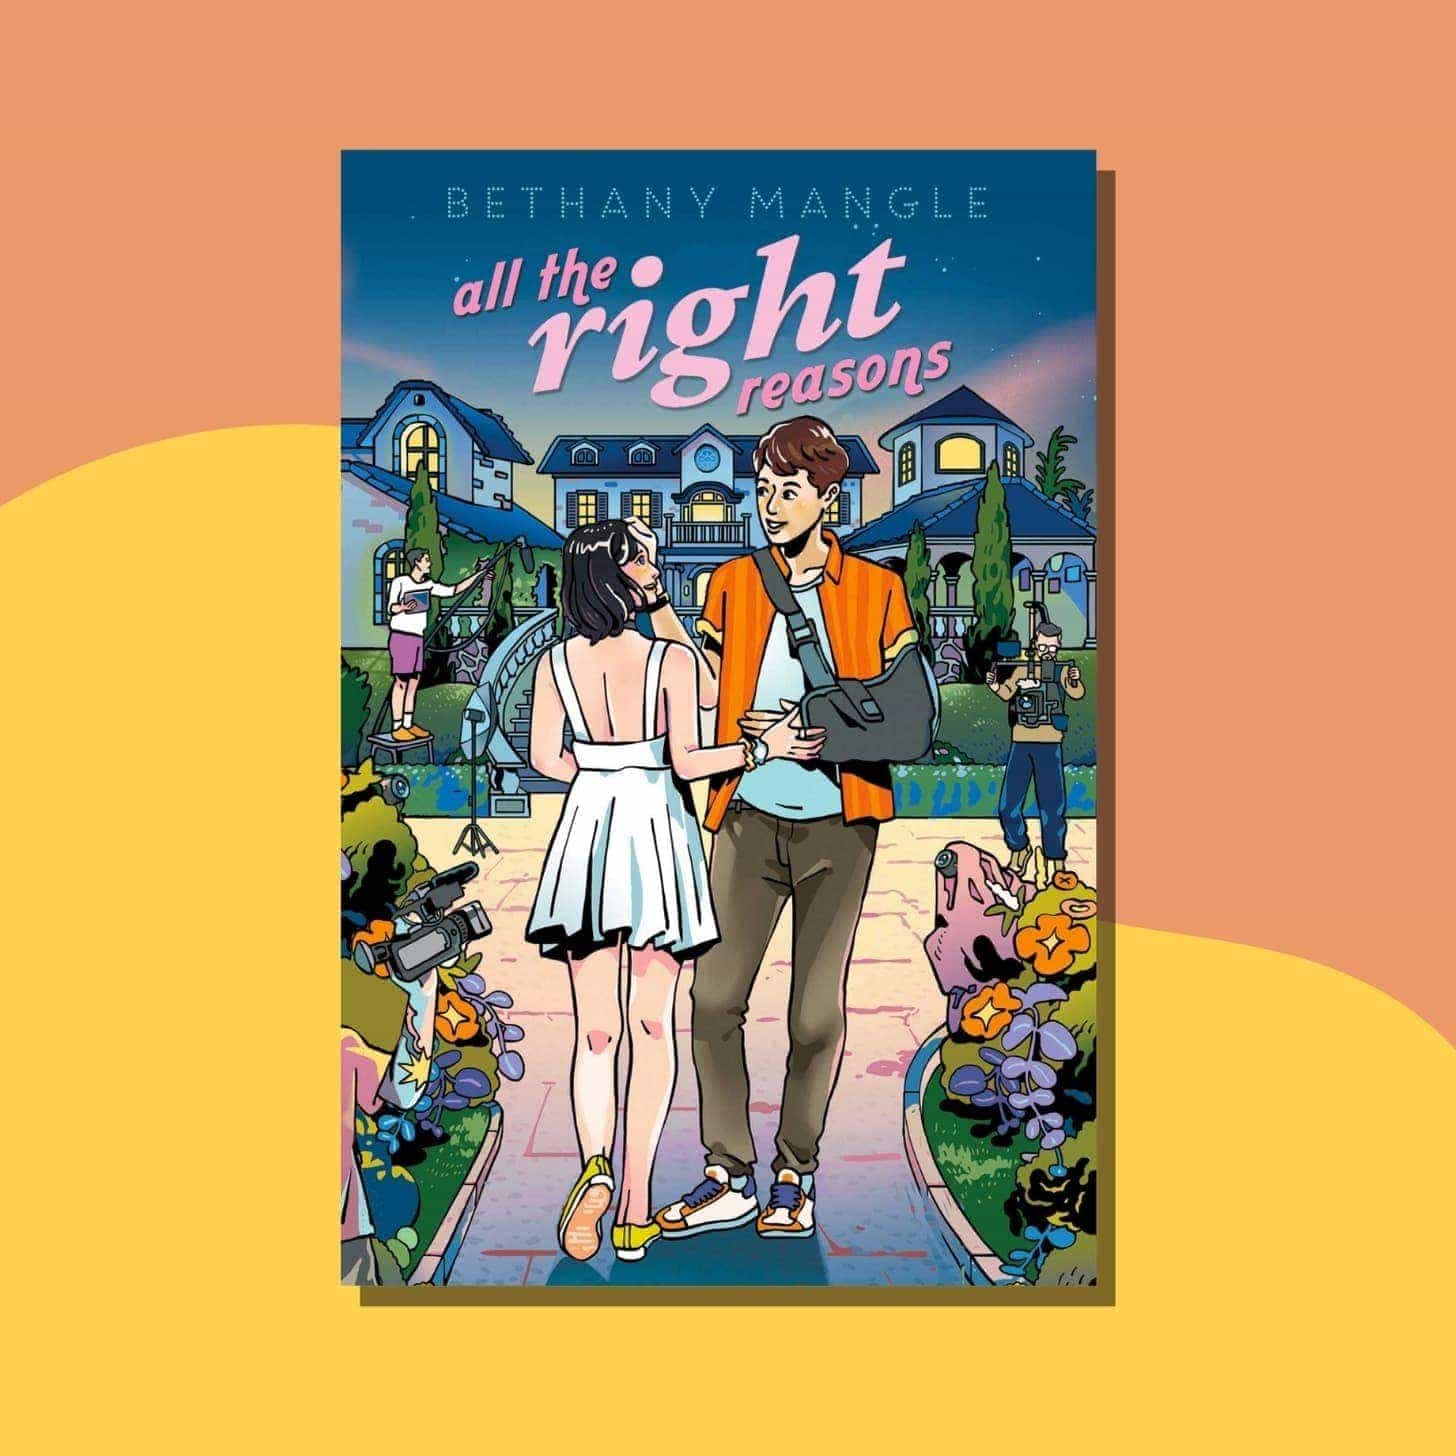 “All the Right Reasons” by Bethany Mangle - Cover shows an illustration of a boy with a cast and a girl in a dress, and tv cameras all around them